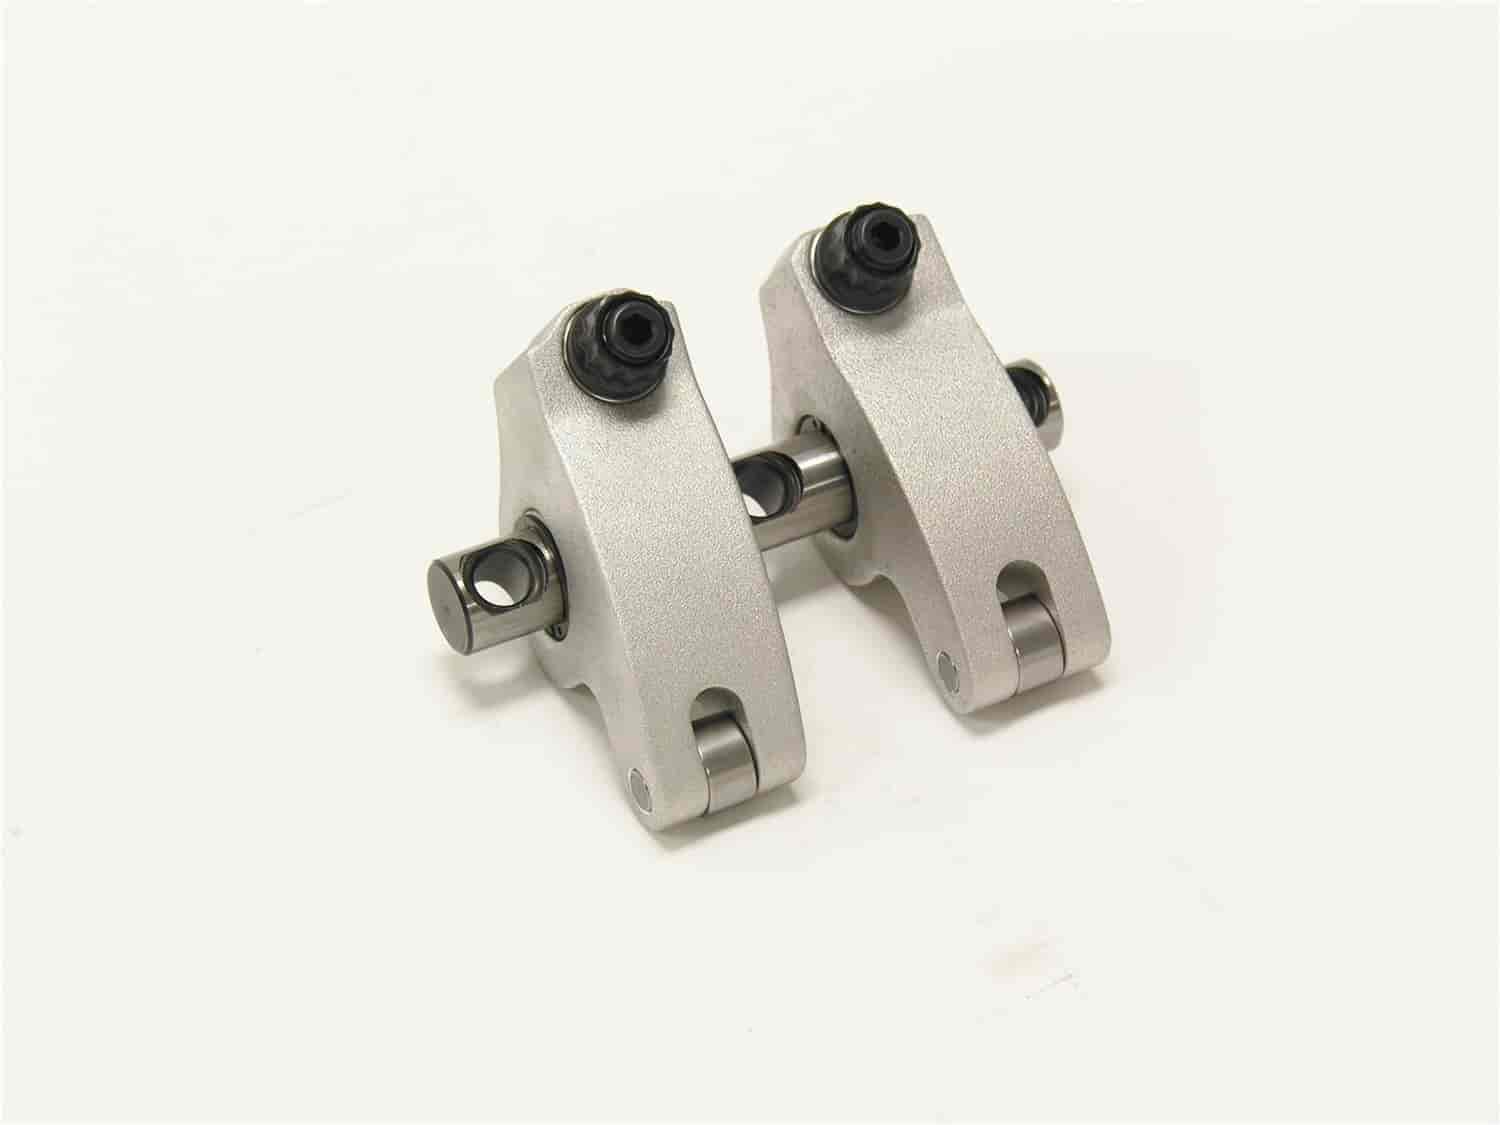 Series SS Shaft Mount Rockers Fits: AFR 165/225cc Outlaw SB-Ford Rocker Ratio: 1.7 IN / 1.7 EX